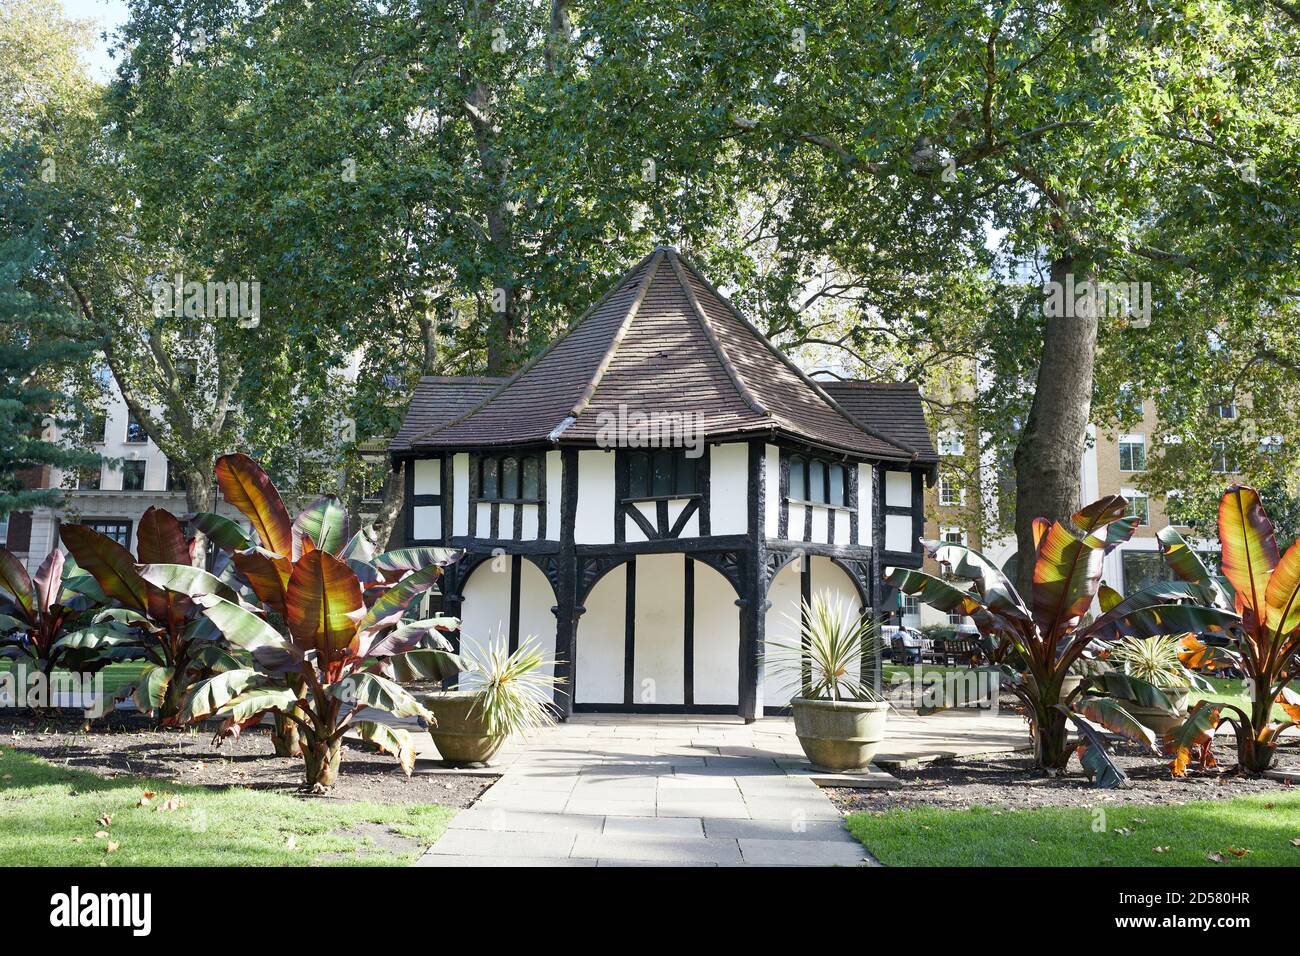 London, UK. - 7 Oct 2020: The listed mock-Tudor building in the centre of Soho Square in Westminster. Built in 1926 to appear as an octagonal market c Stock Photo